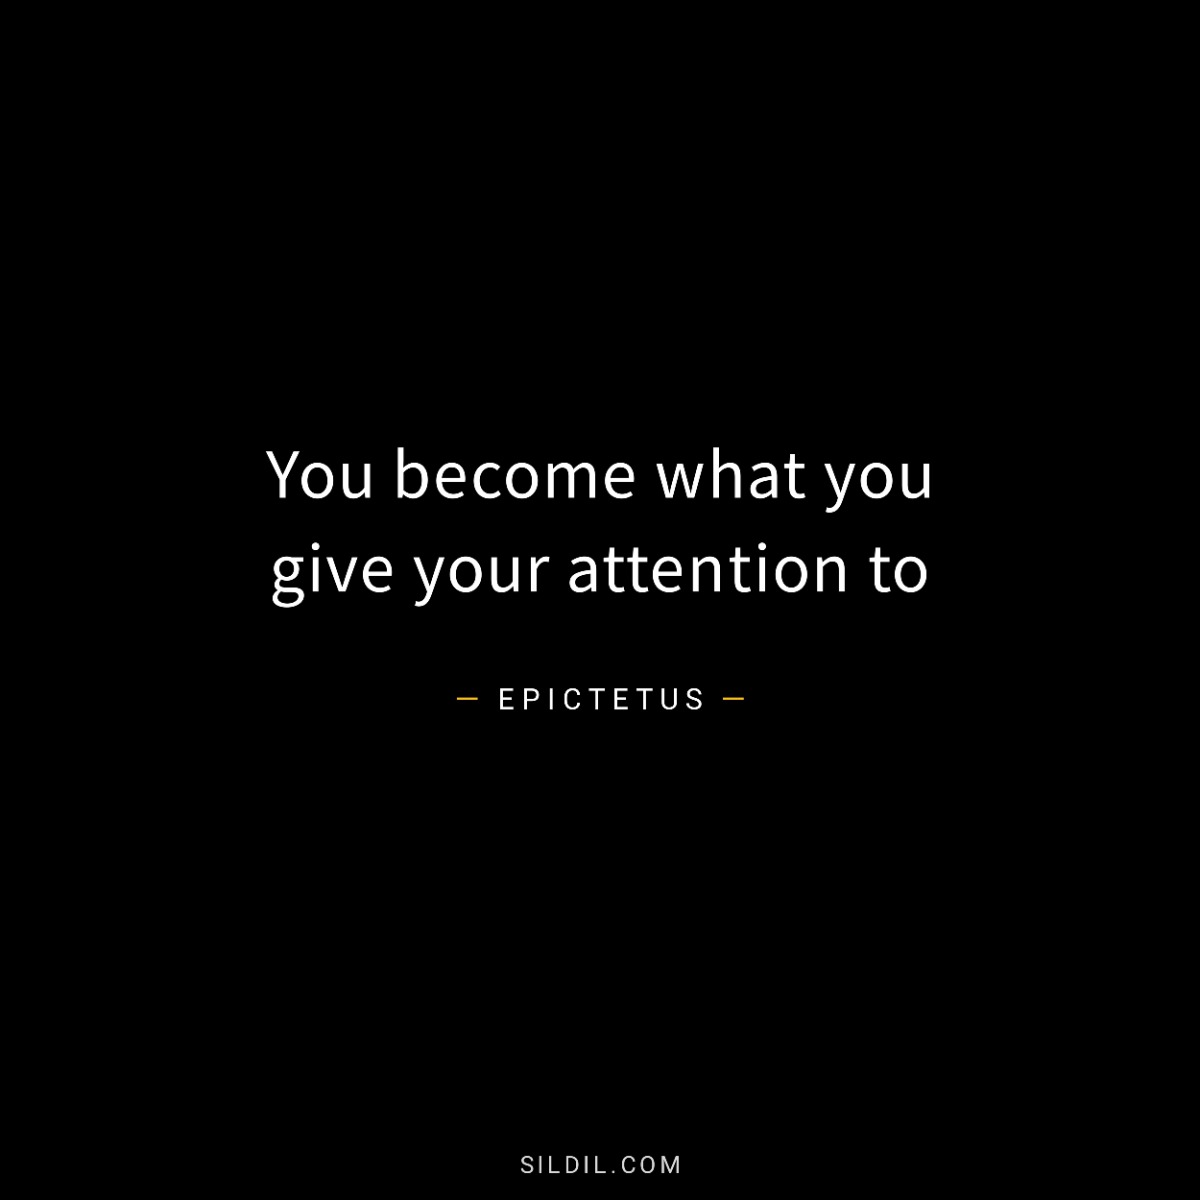 You become what you give your attention to